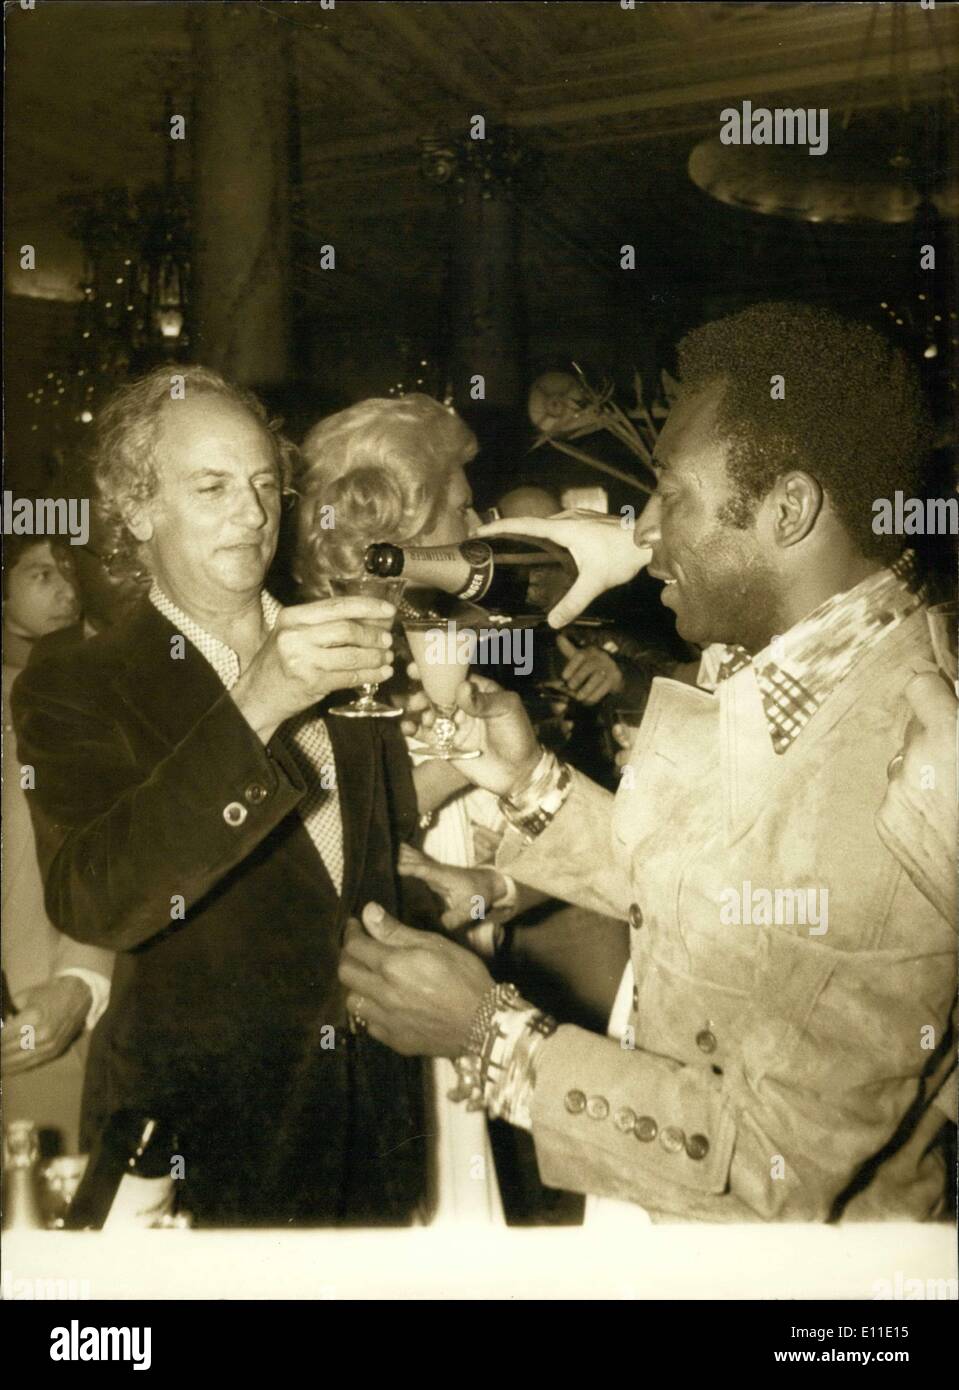 May 20, 1977 - They are at the International Film Festival for the premier of Reichenbach's movies about Pele. Stock Photo